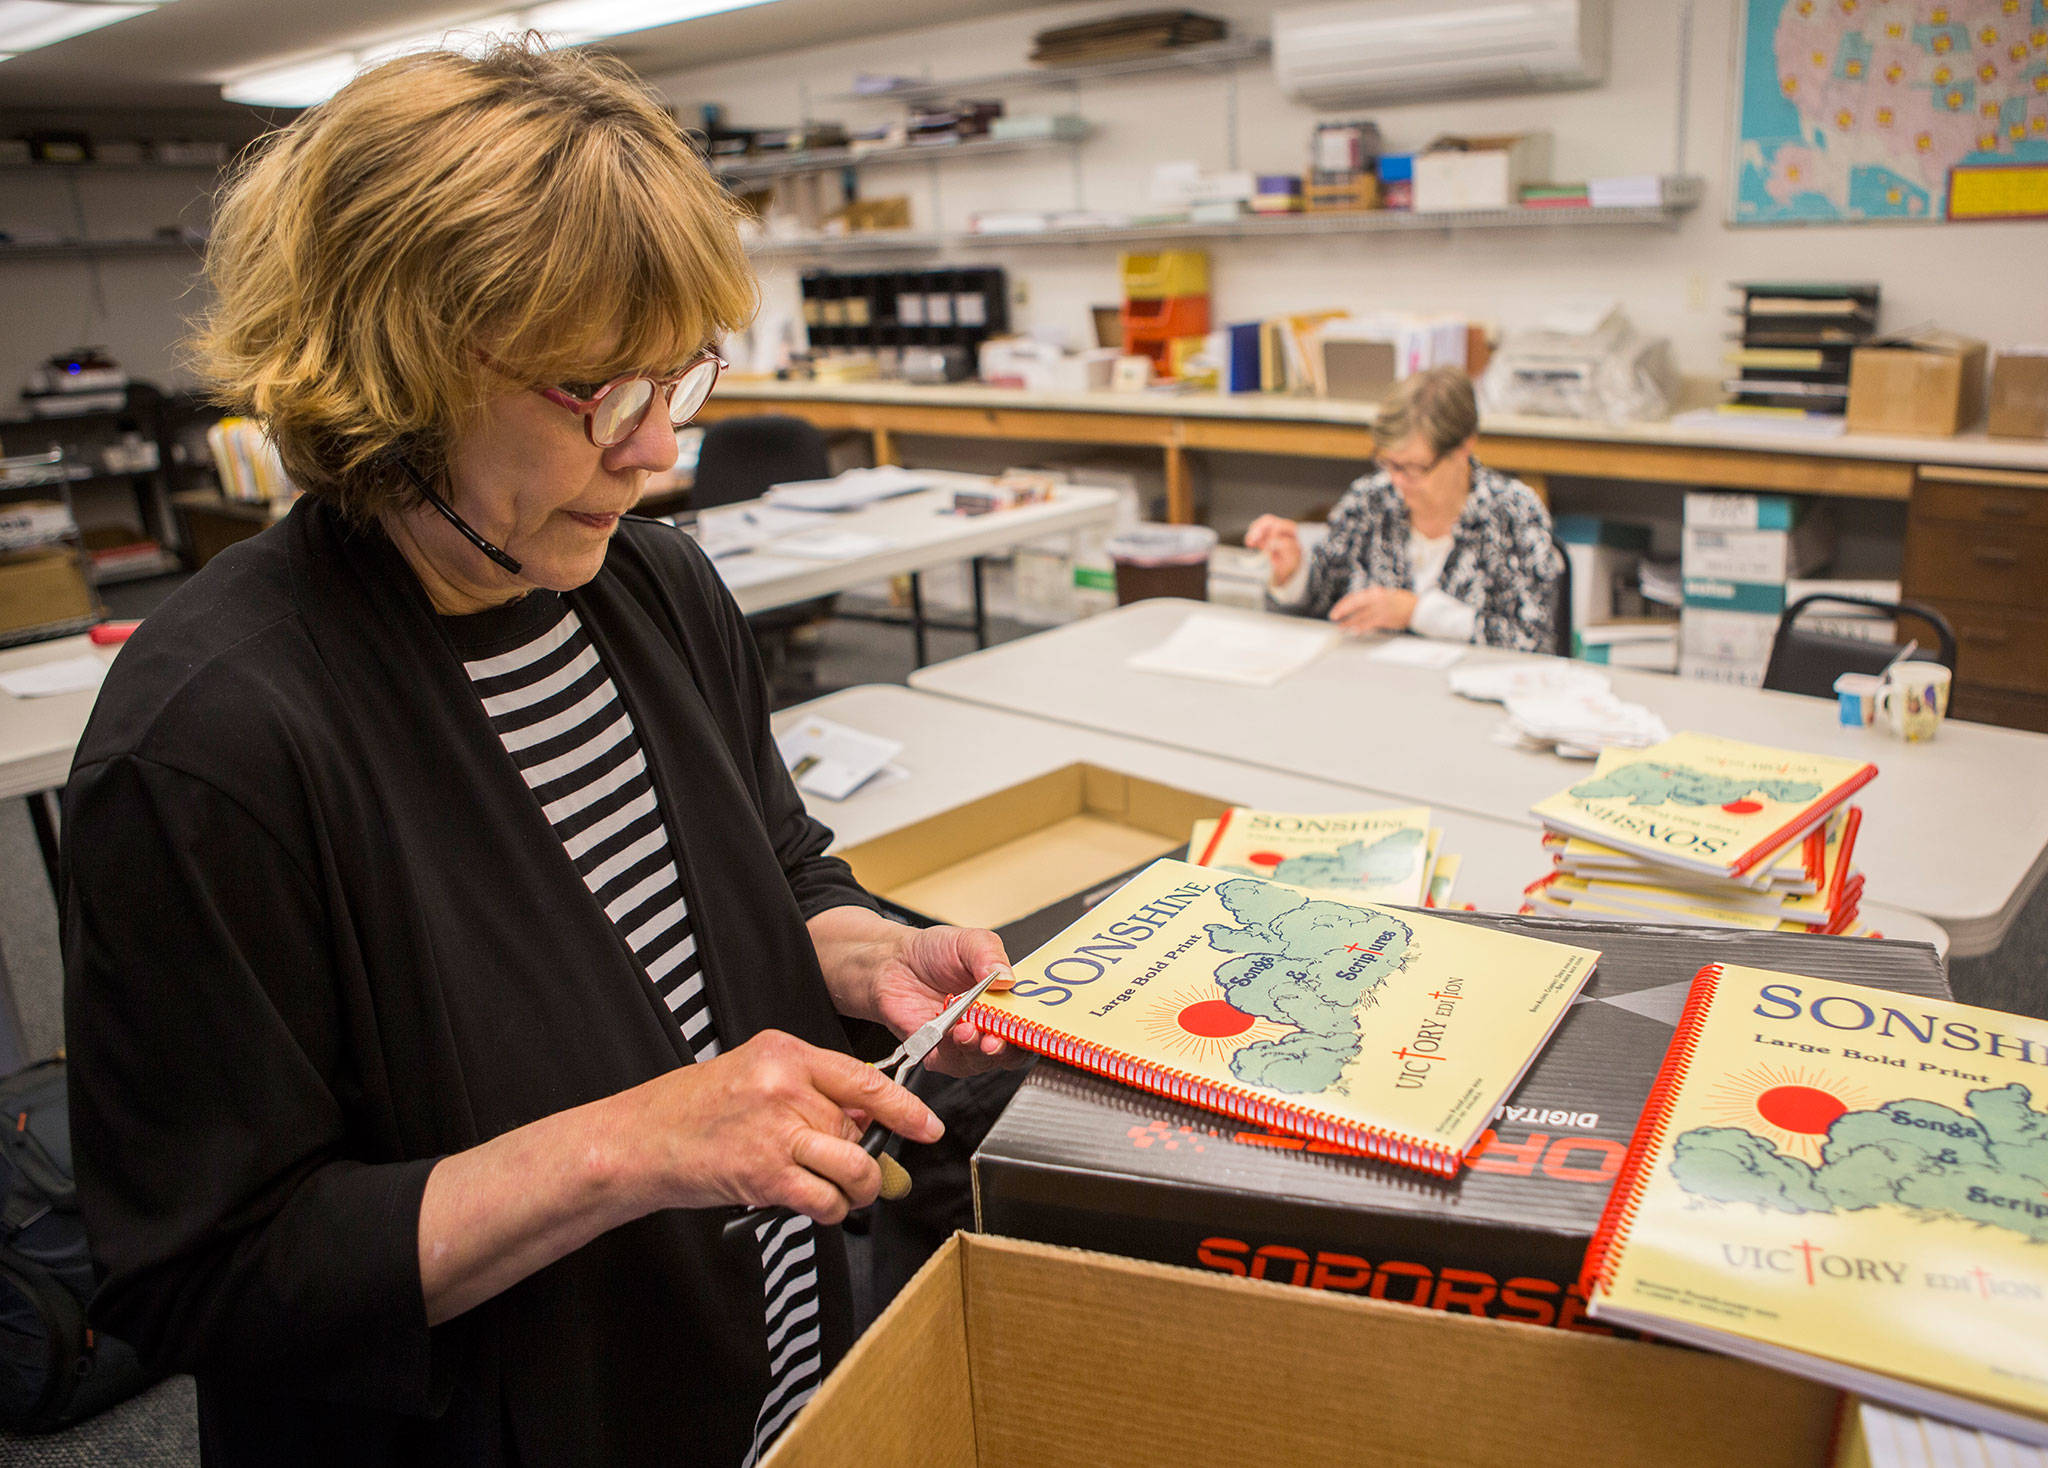 Patty Brinkerhoff works on the binding of recently finished song books at the Sonshine Society office on Sept. 26, 2018 in Everett, Wa. (Olivia Vanni / The Herald)